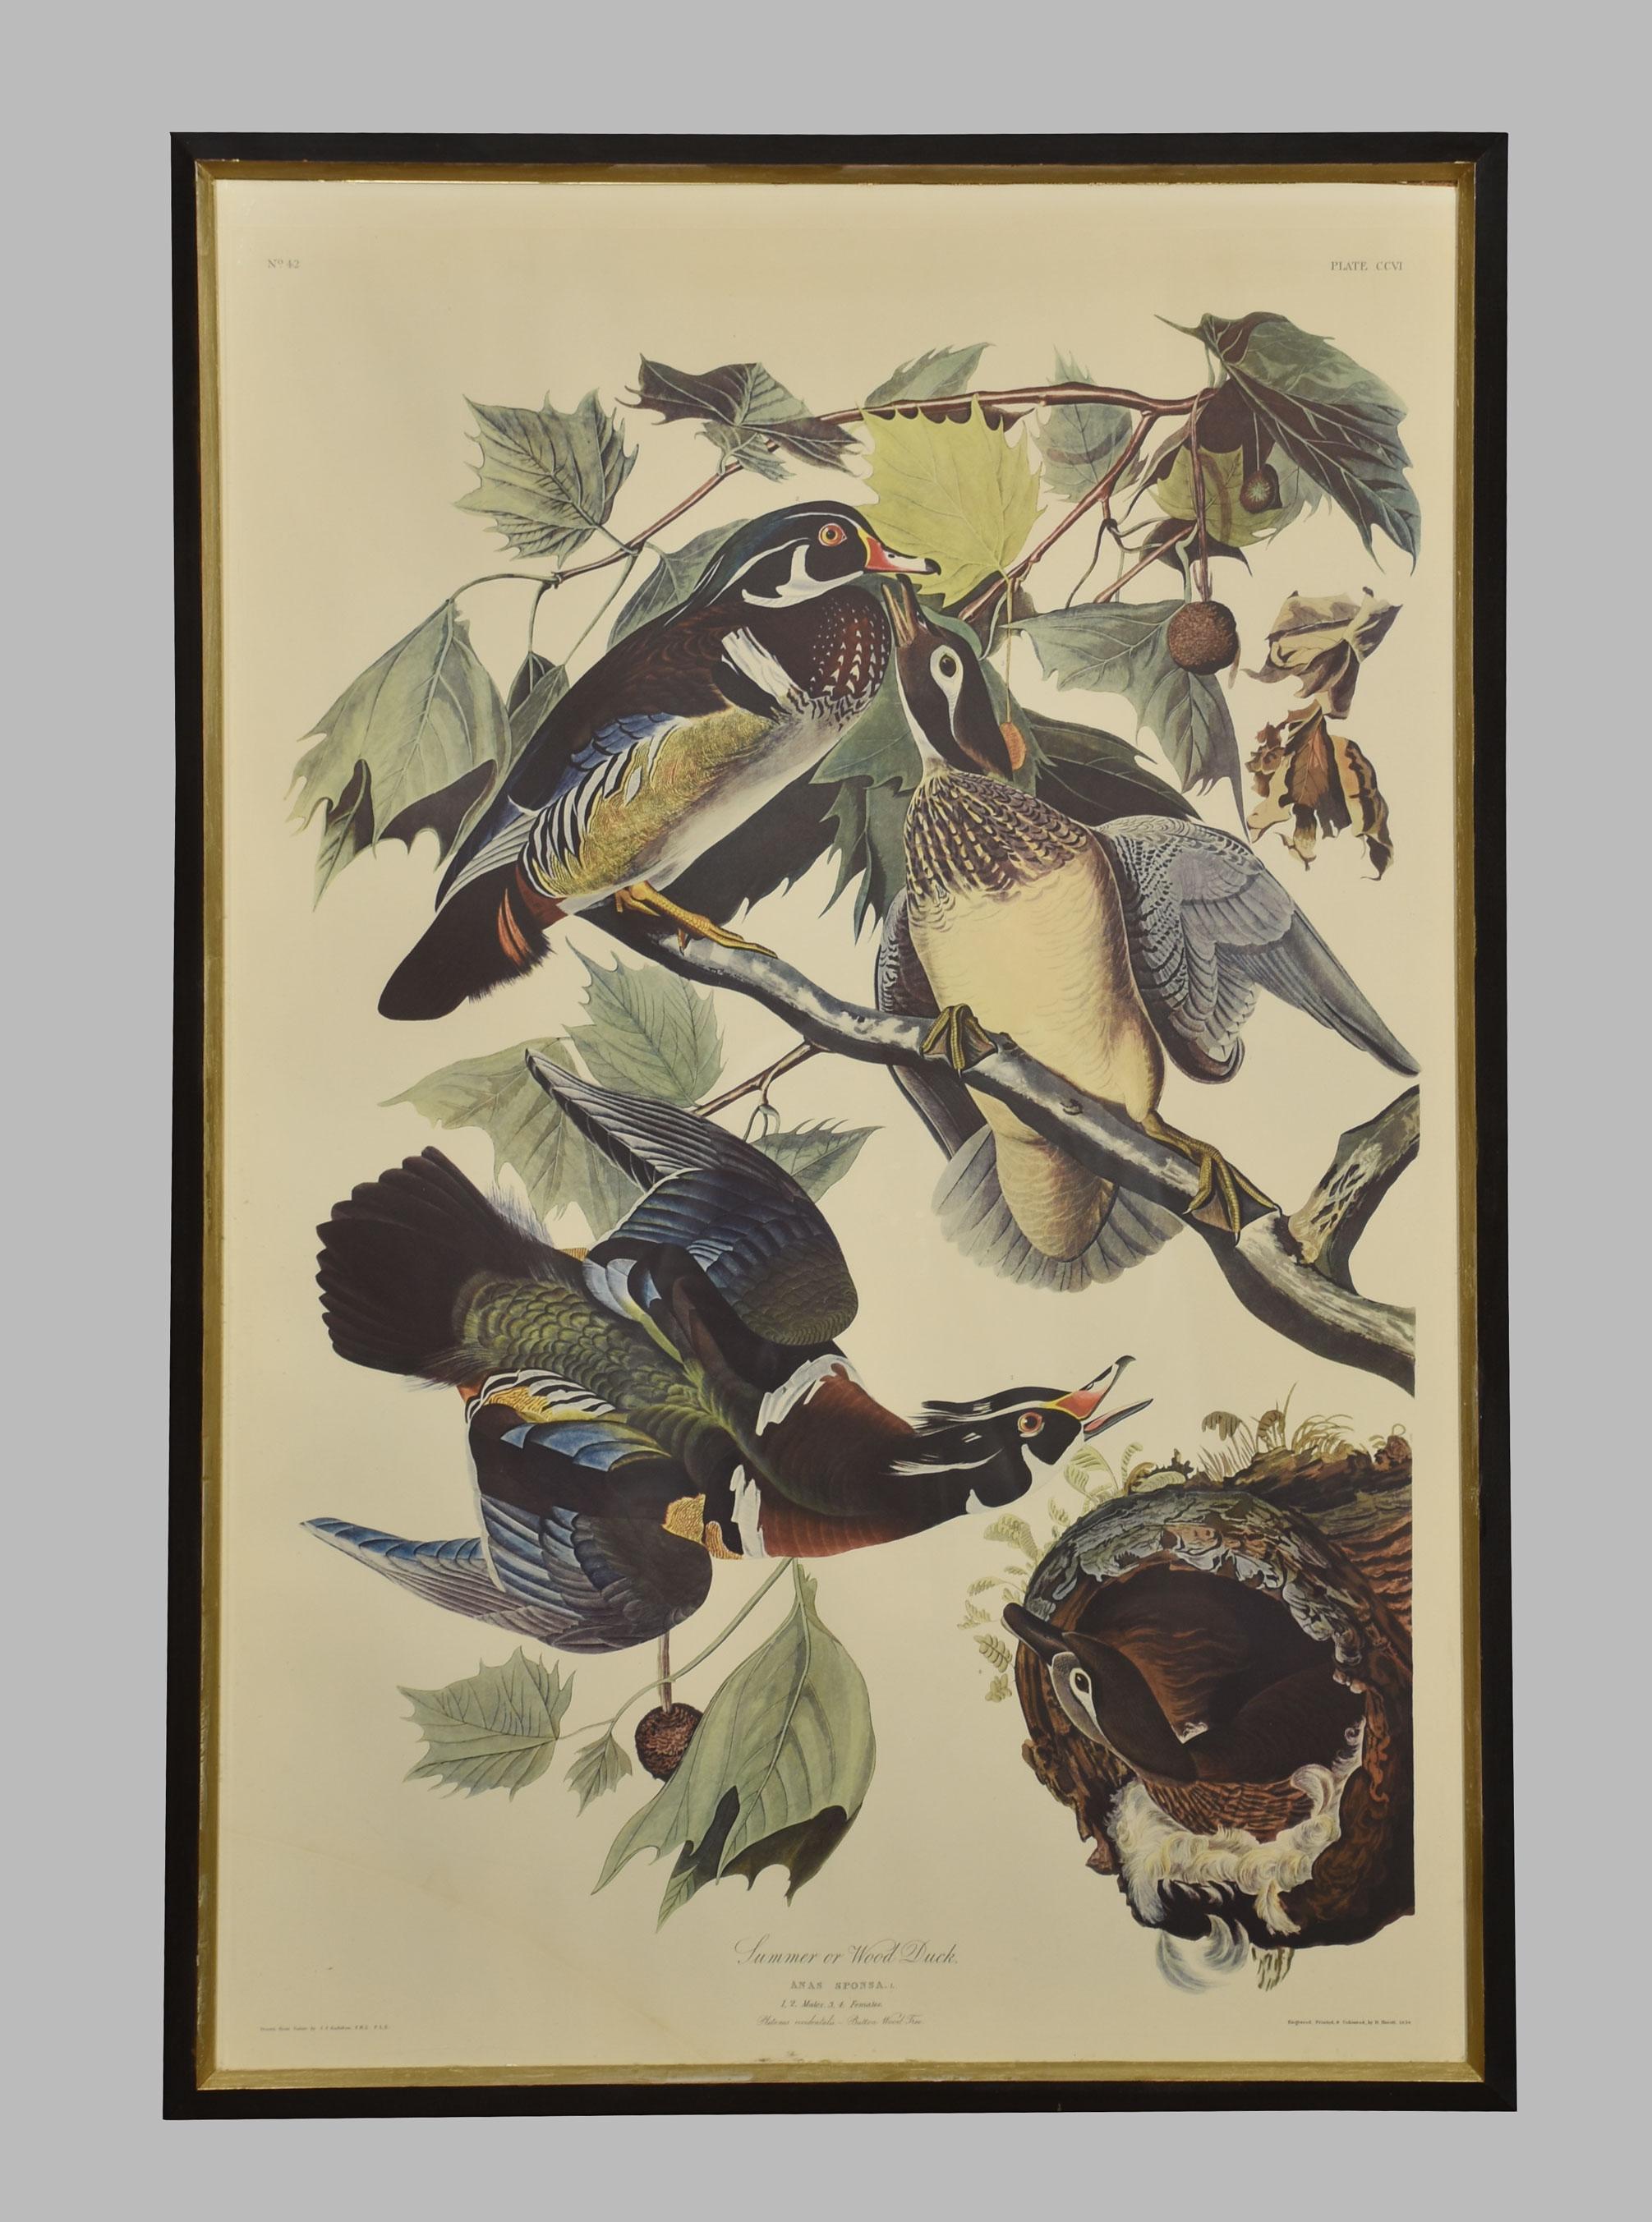 After John J Audubon, two large ornithological studies comprising: “Summer or Wood Duck” and “Pileated Woodpecker, encased in ebonies frames.
Dimensions
Height 41.5 Inches
Width 28 Inches
Depth 1 Inches.